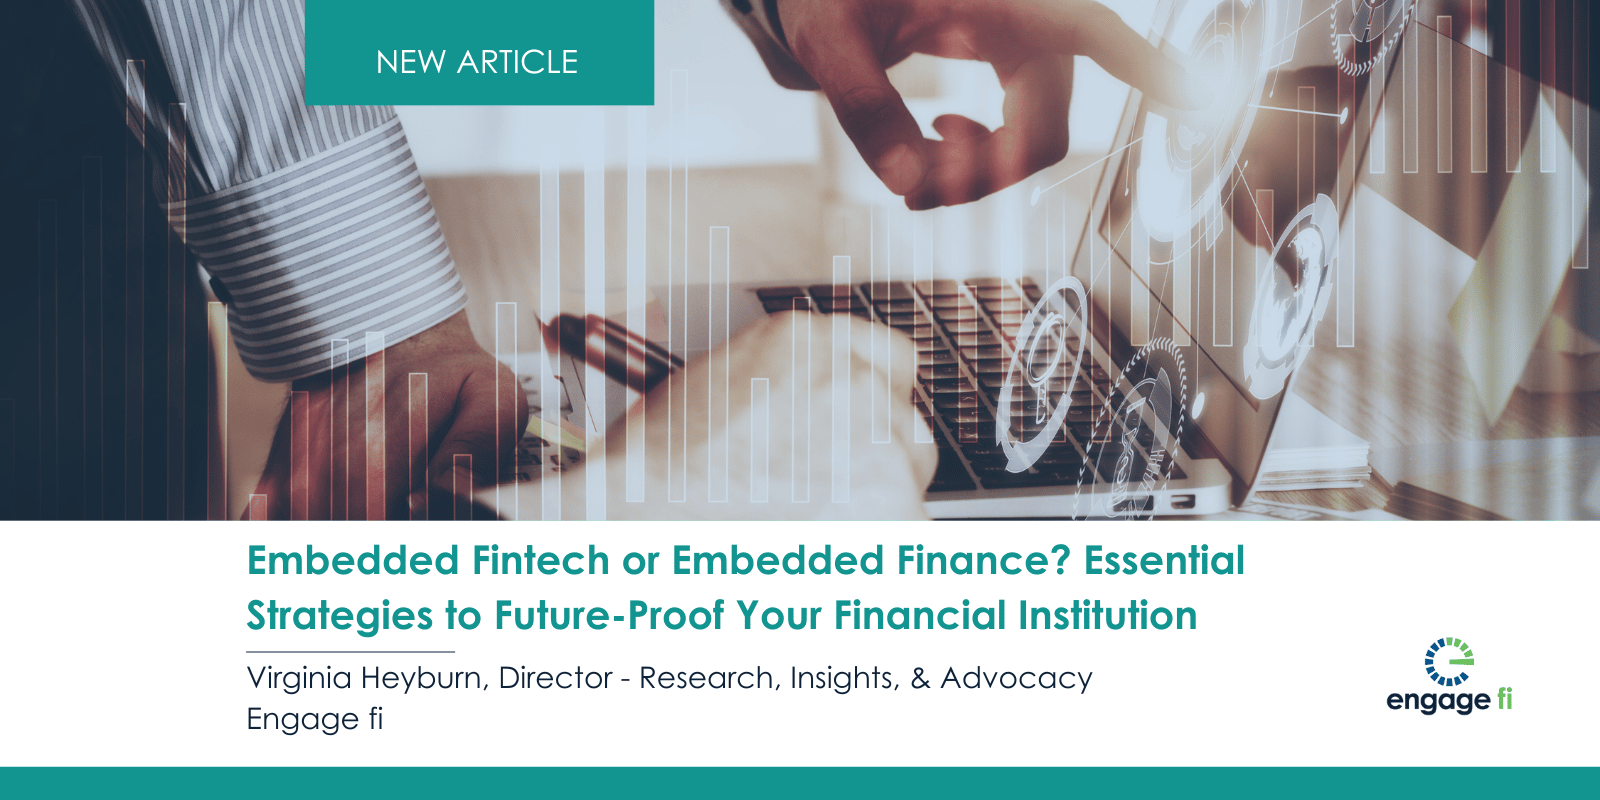 Embedded Fintech or Embedded Finance? Essential Strategies to Future-Proof Your Financial Institution